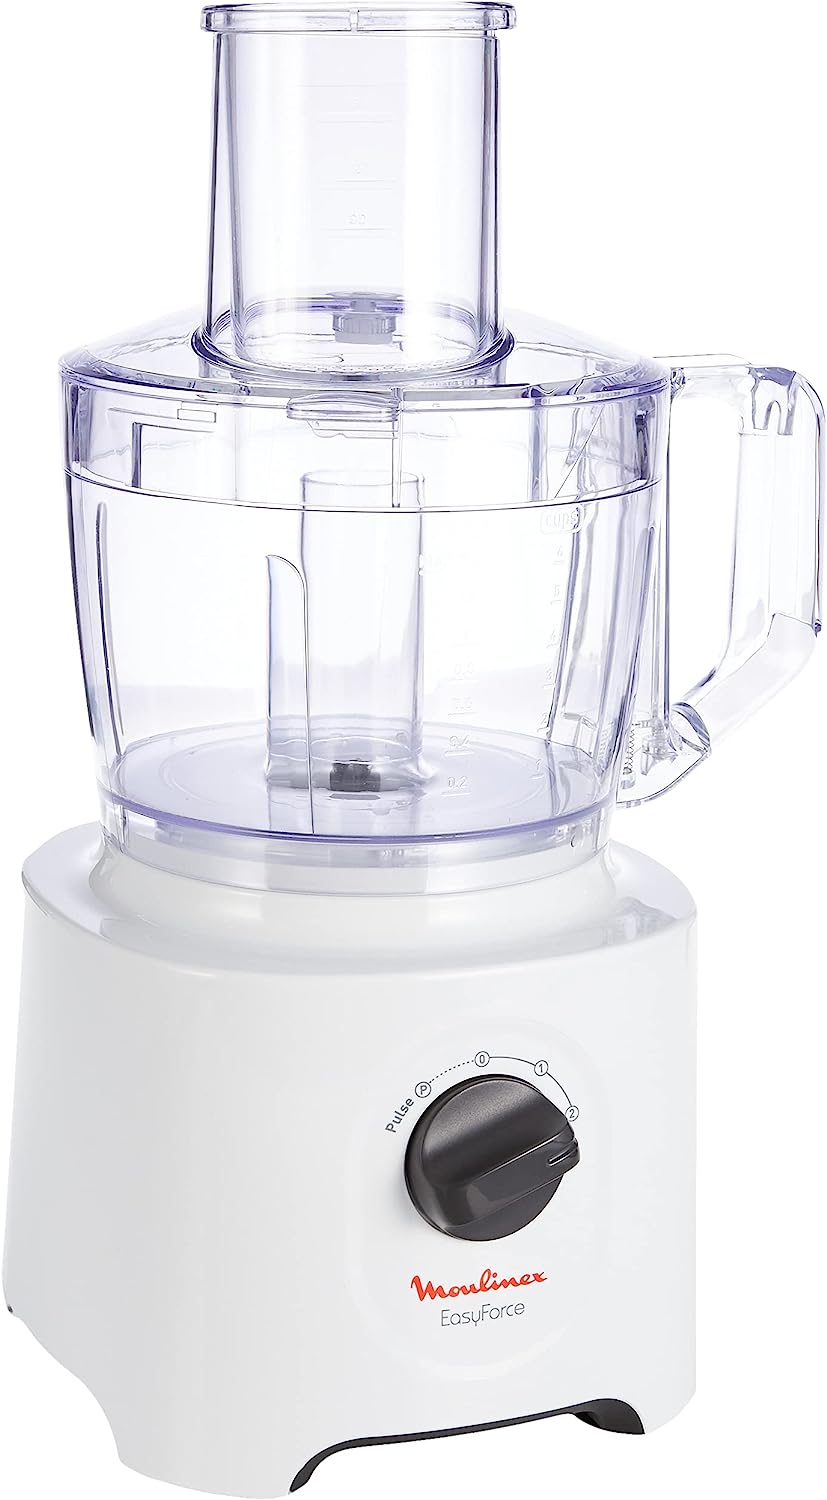 Moulinex Food Processor, Easy Force 800 Watts, 1.8 Liter and 2.4Liter Bowl capacity